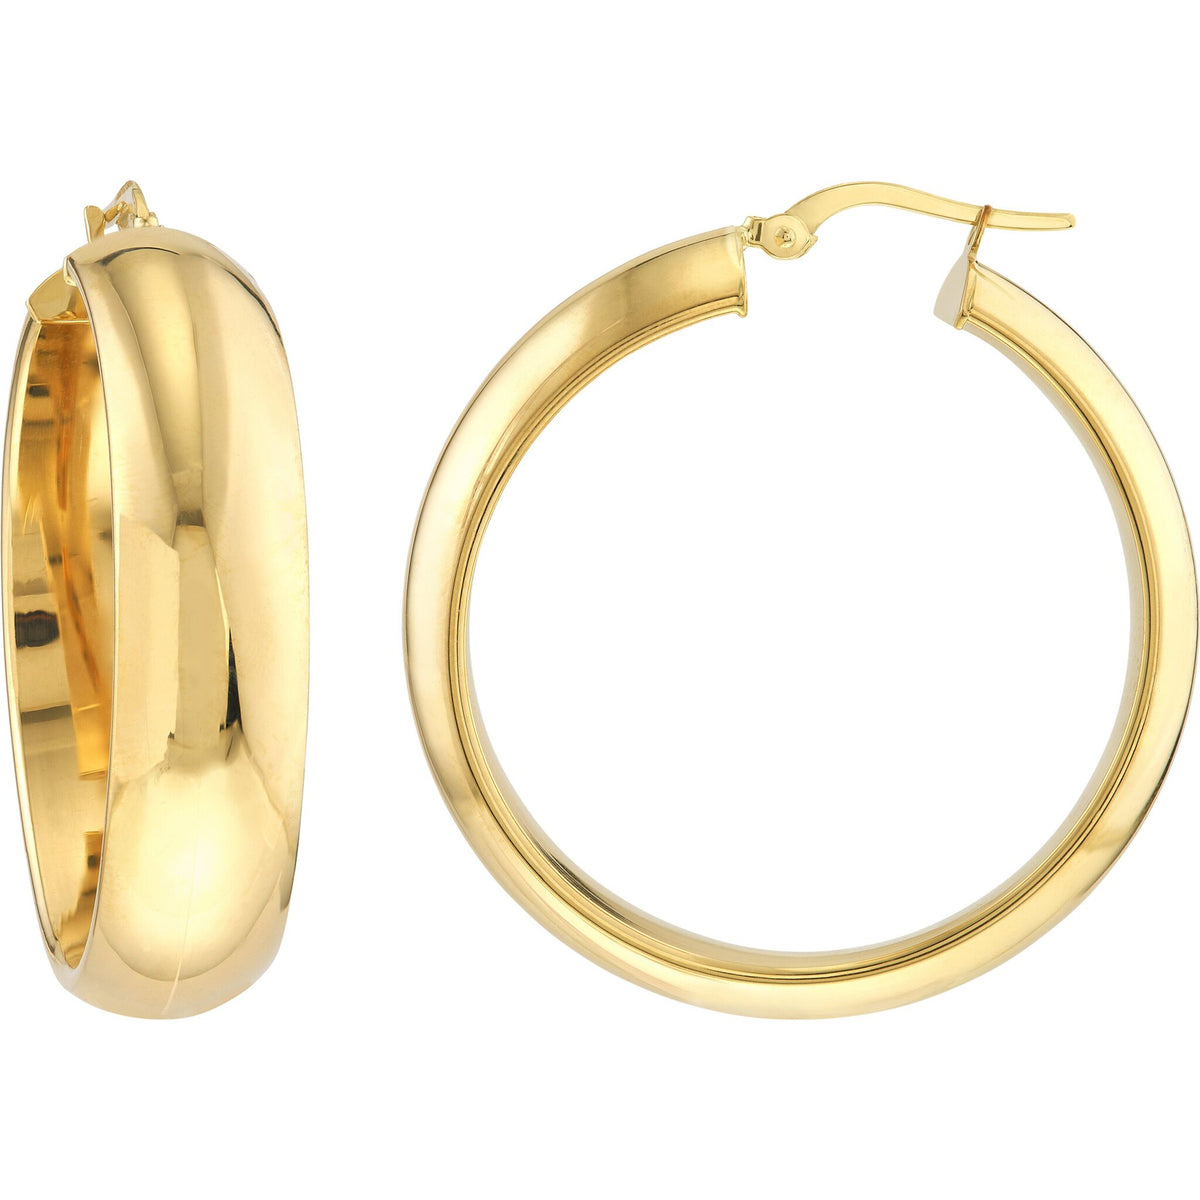 Olas d'Oro Earrings - 14K Yellow Gold Round High Polished Hoops